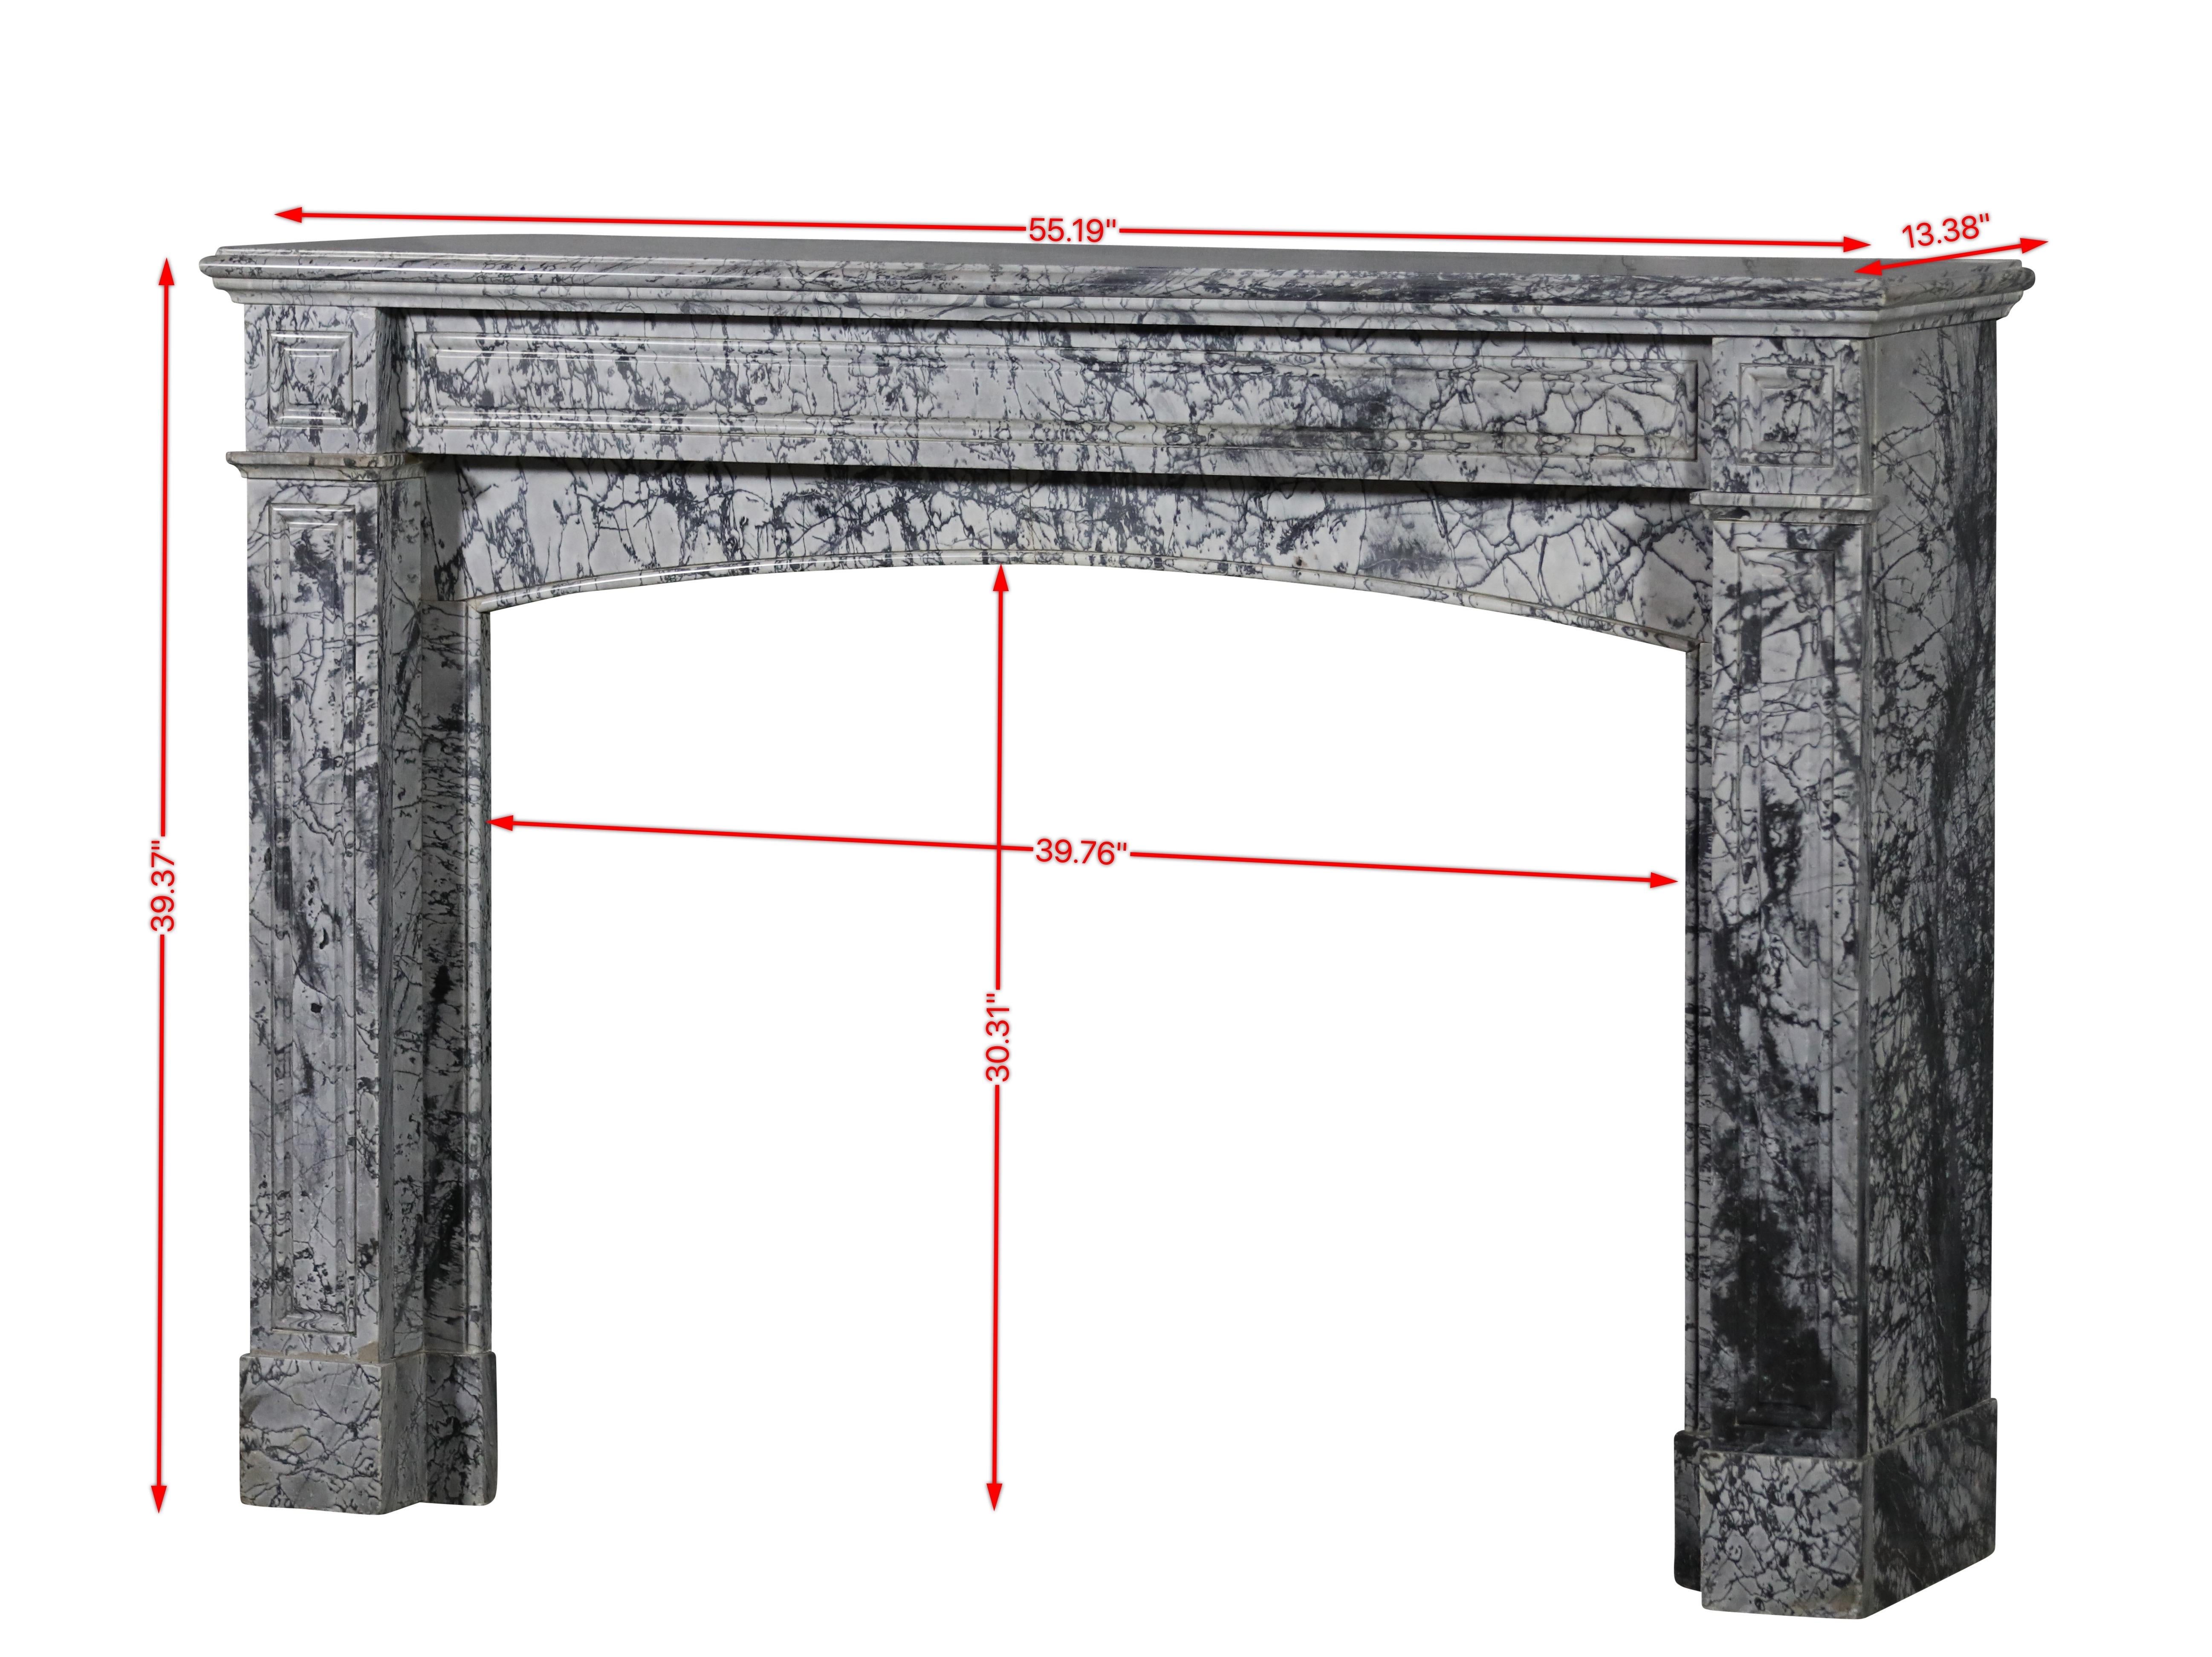 Decorative Bleu Turquin marble Louis Philippe period vintage fireplace surround reclaimed from a chateau bedroom.
19th century period.
Measurements:
140 cm Exterior Width 55,19 Inch
100 cm Exterior Height 39,37 Inch
101 cm Interior Width 39,76